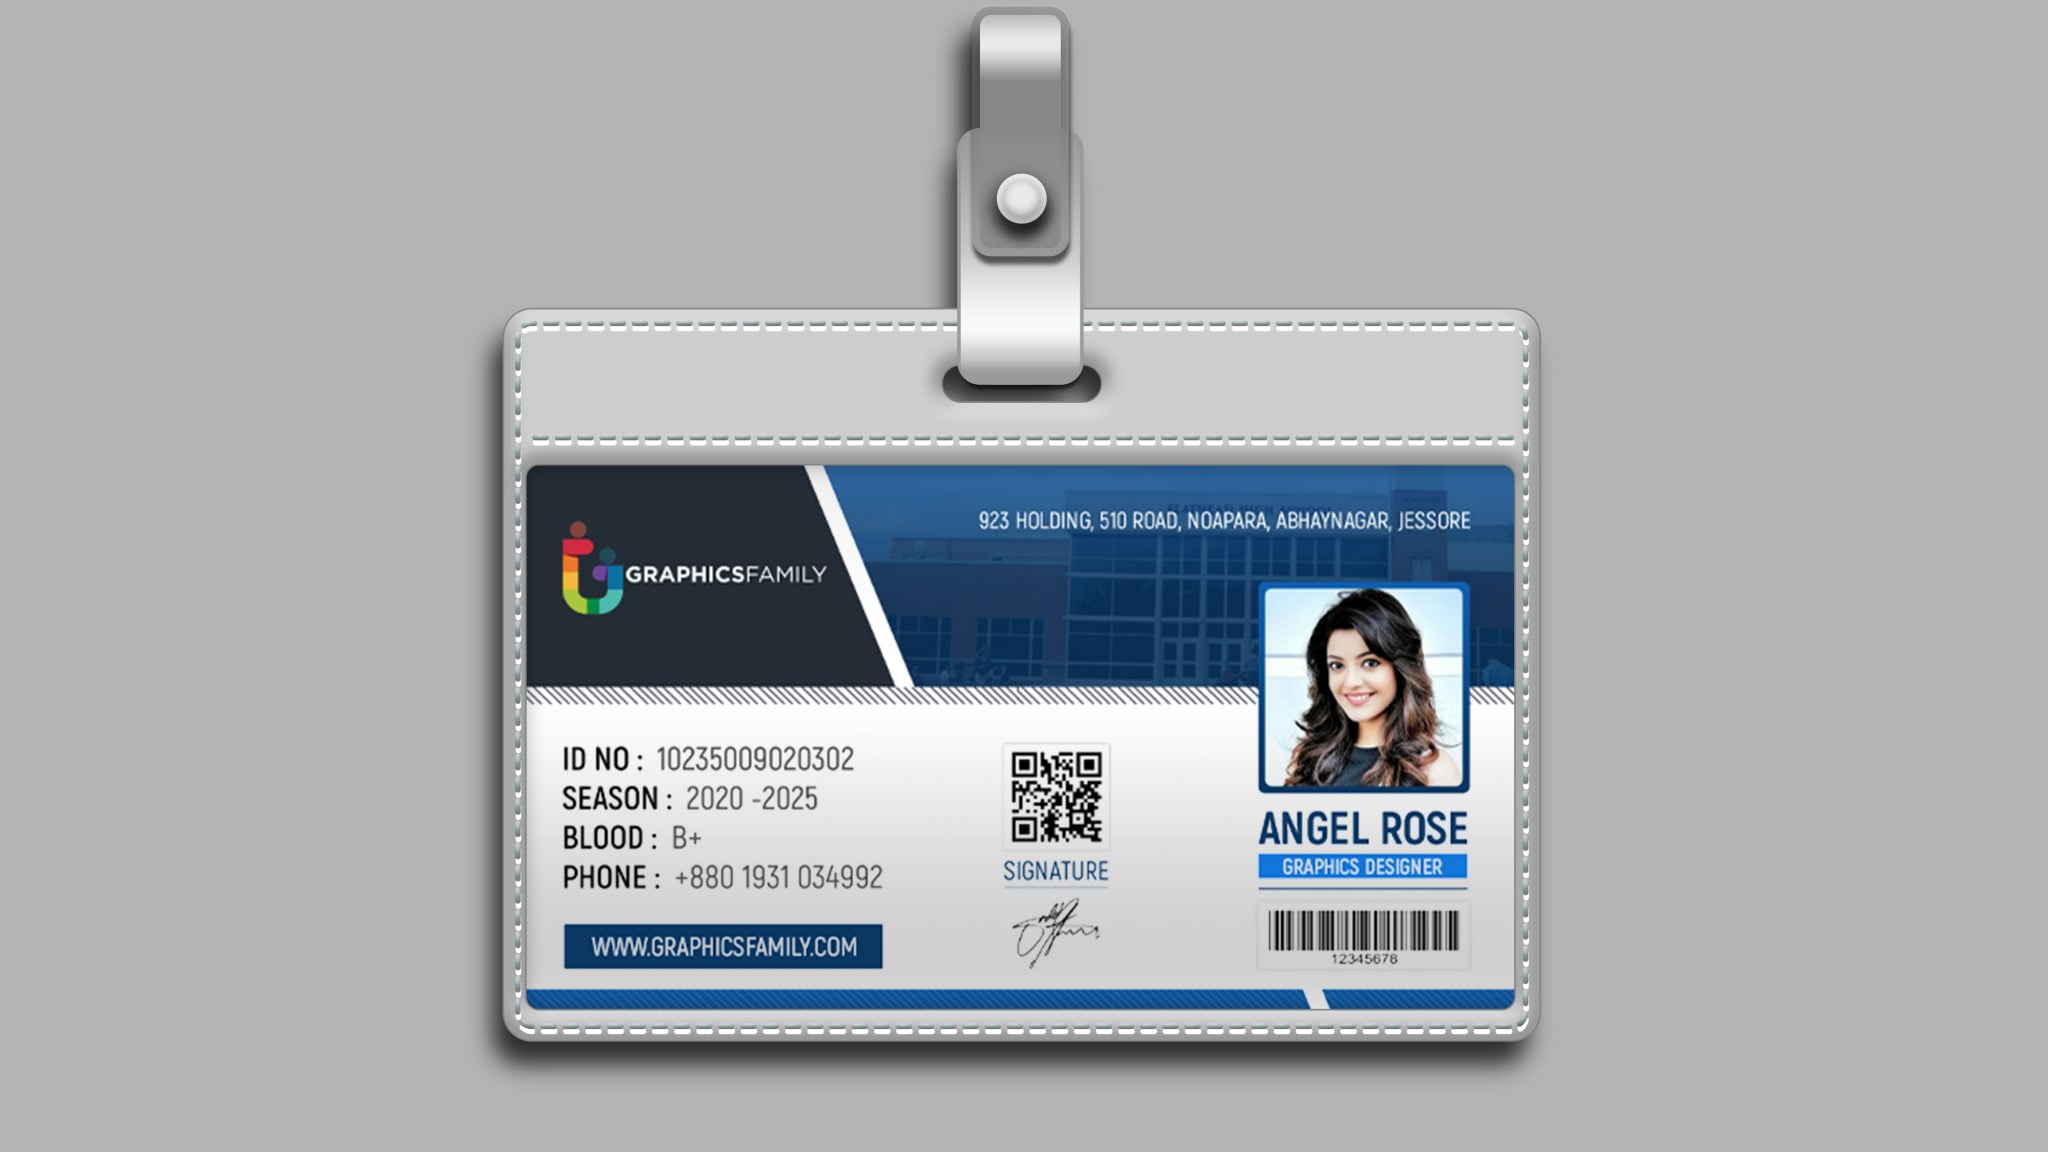 student id cards templates free downloads